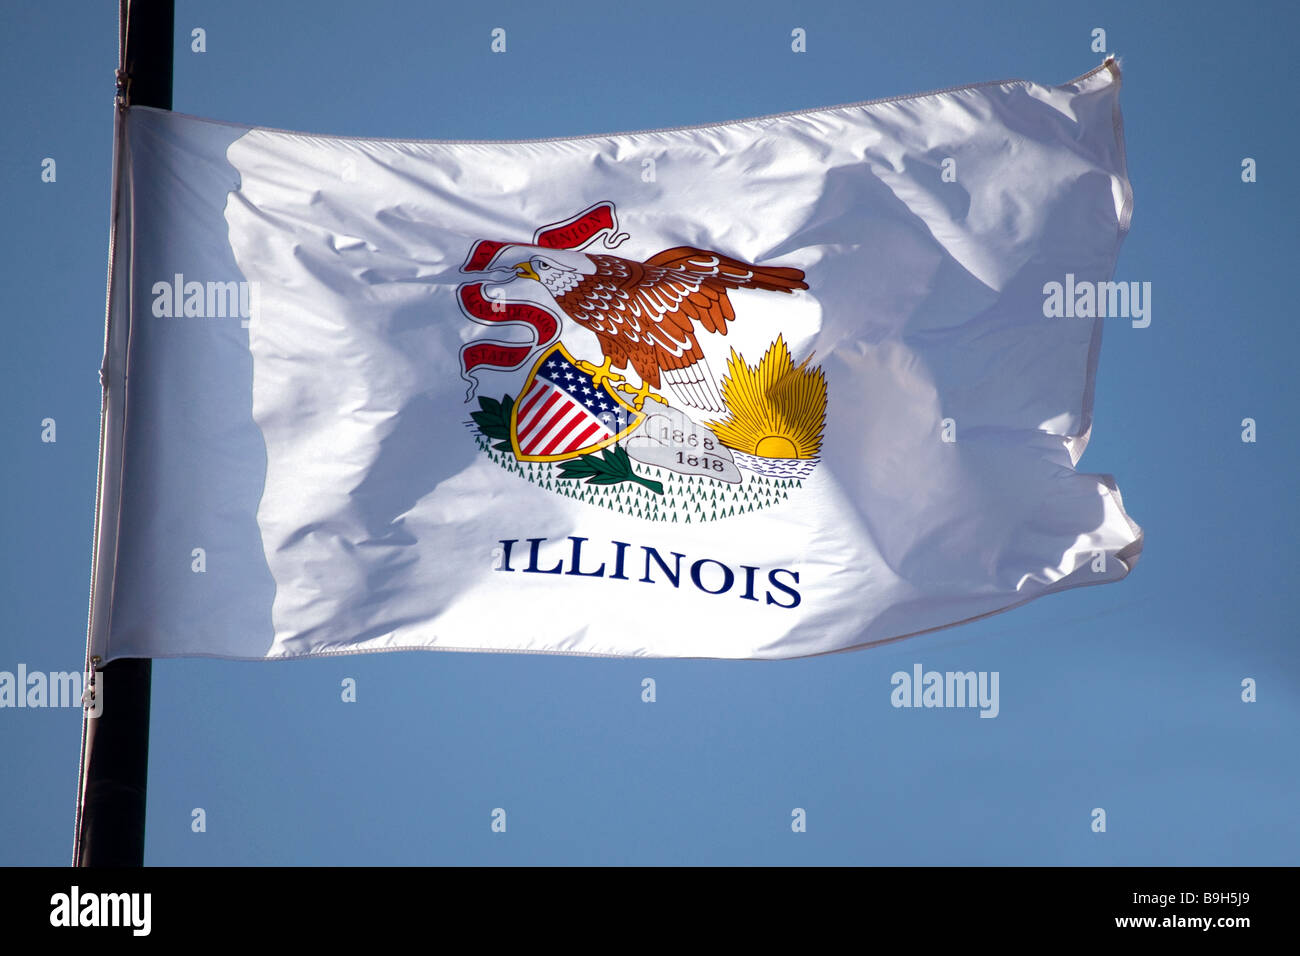 The Illinois state flag flying Stock Photo